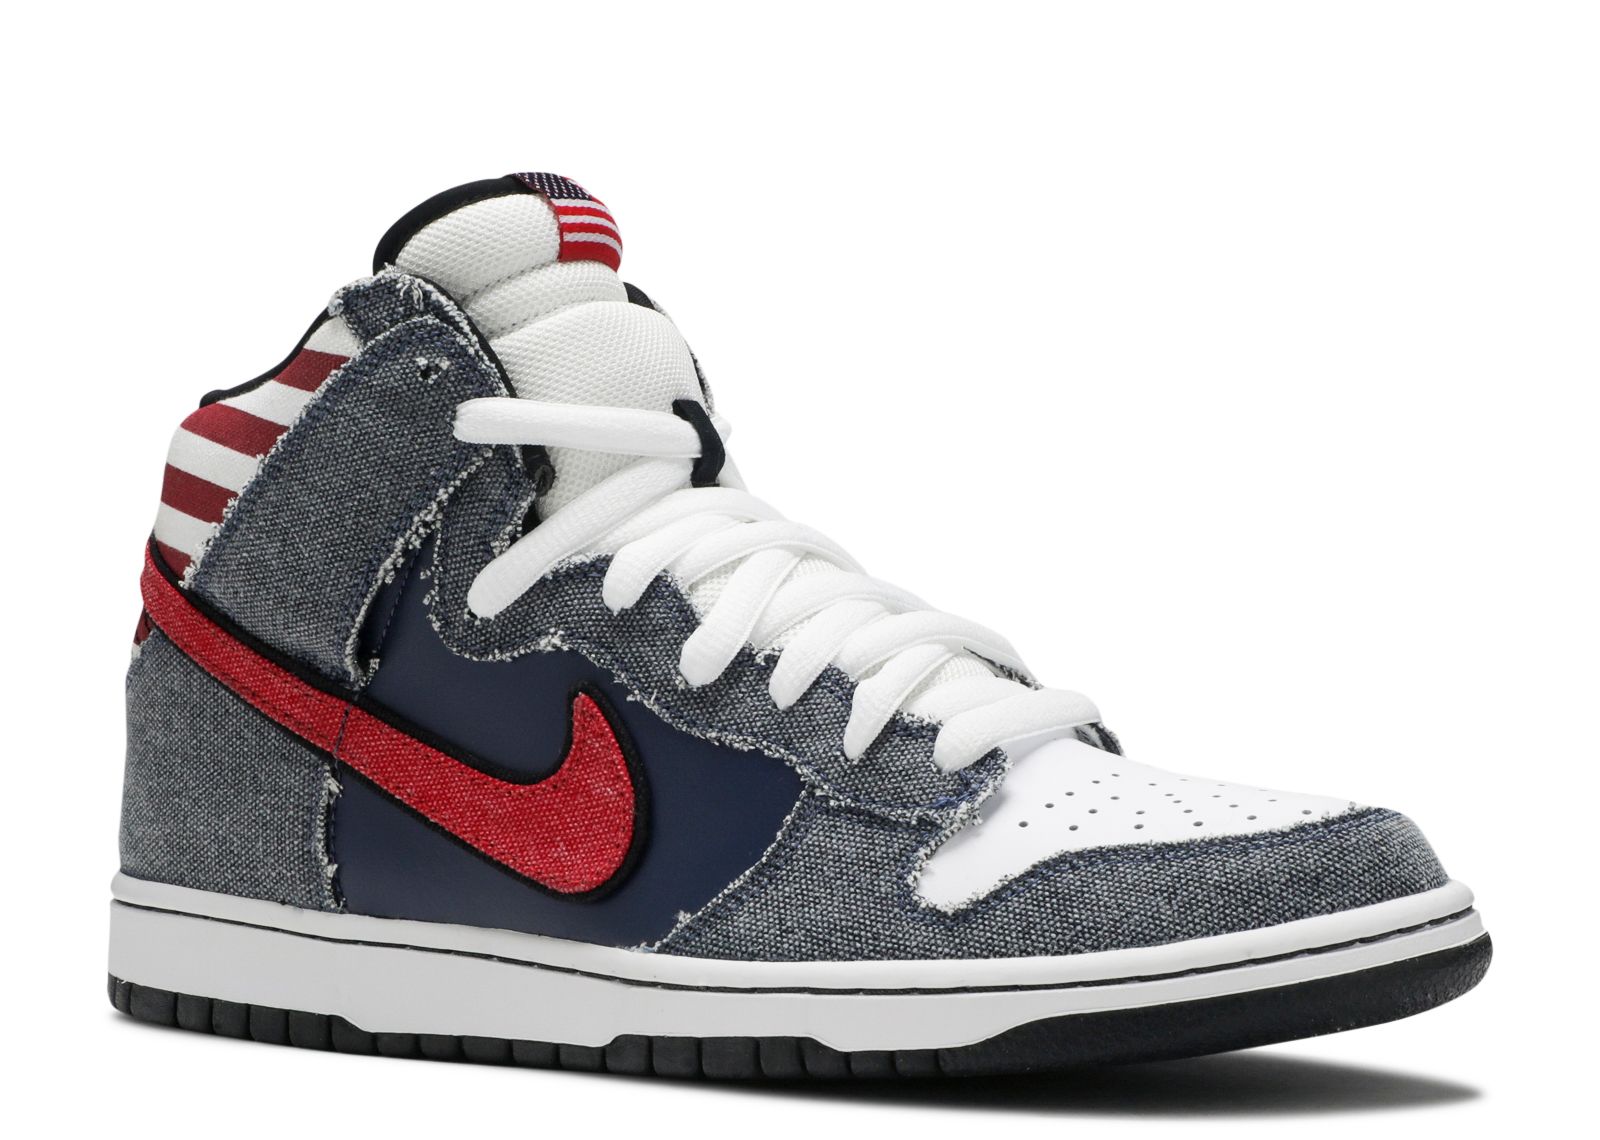 born in the usa dunks